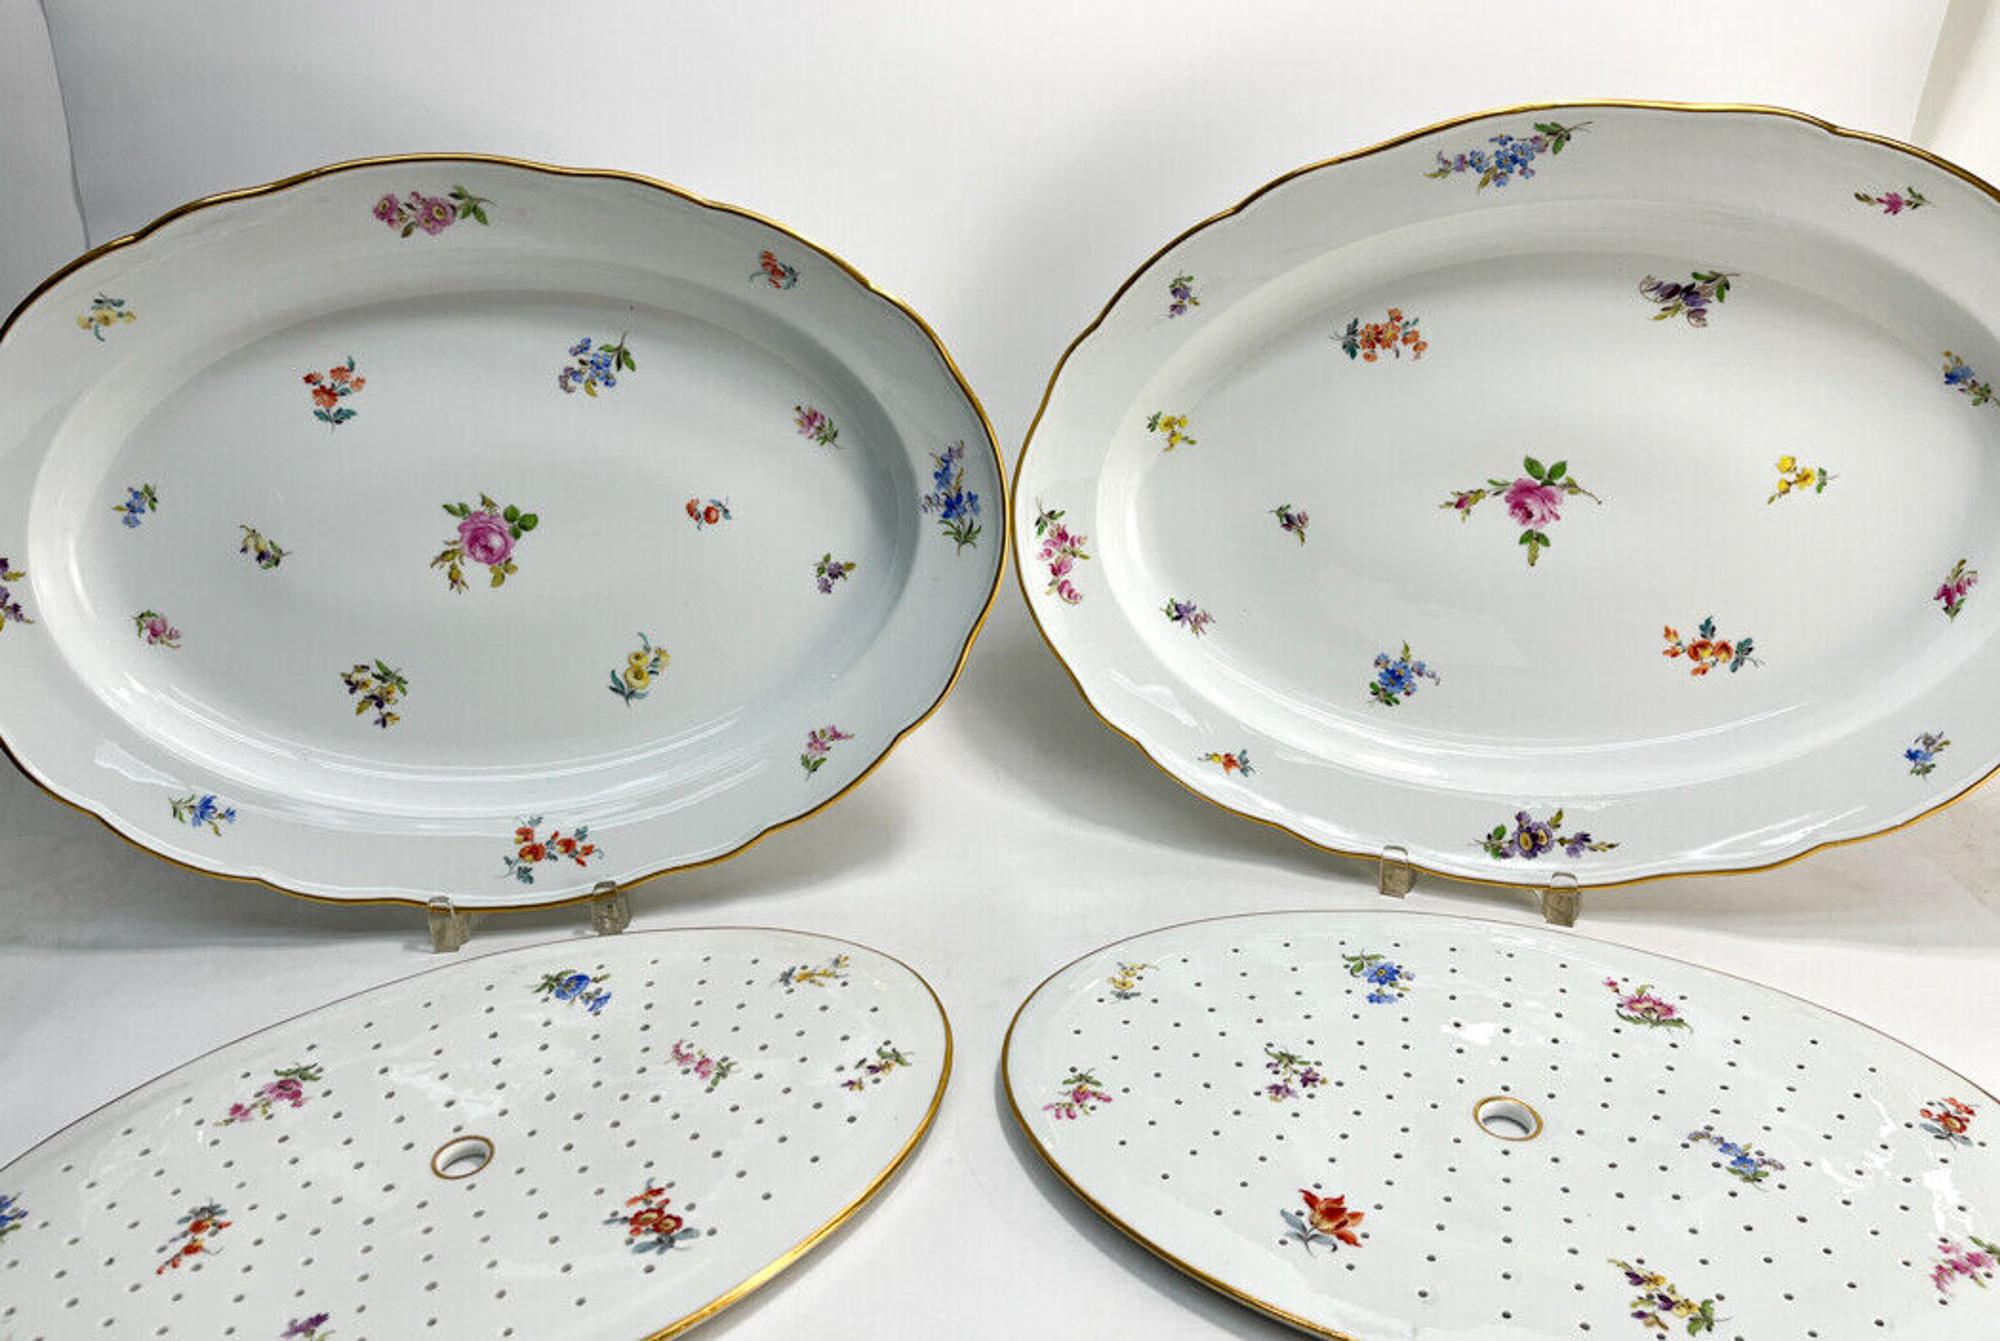  Pair Meissen Germany Porcelain Serving Inset Strainer Entrée Dishes  In Good Condition For Sale In Gardena, CA